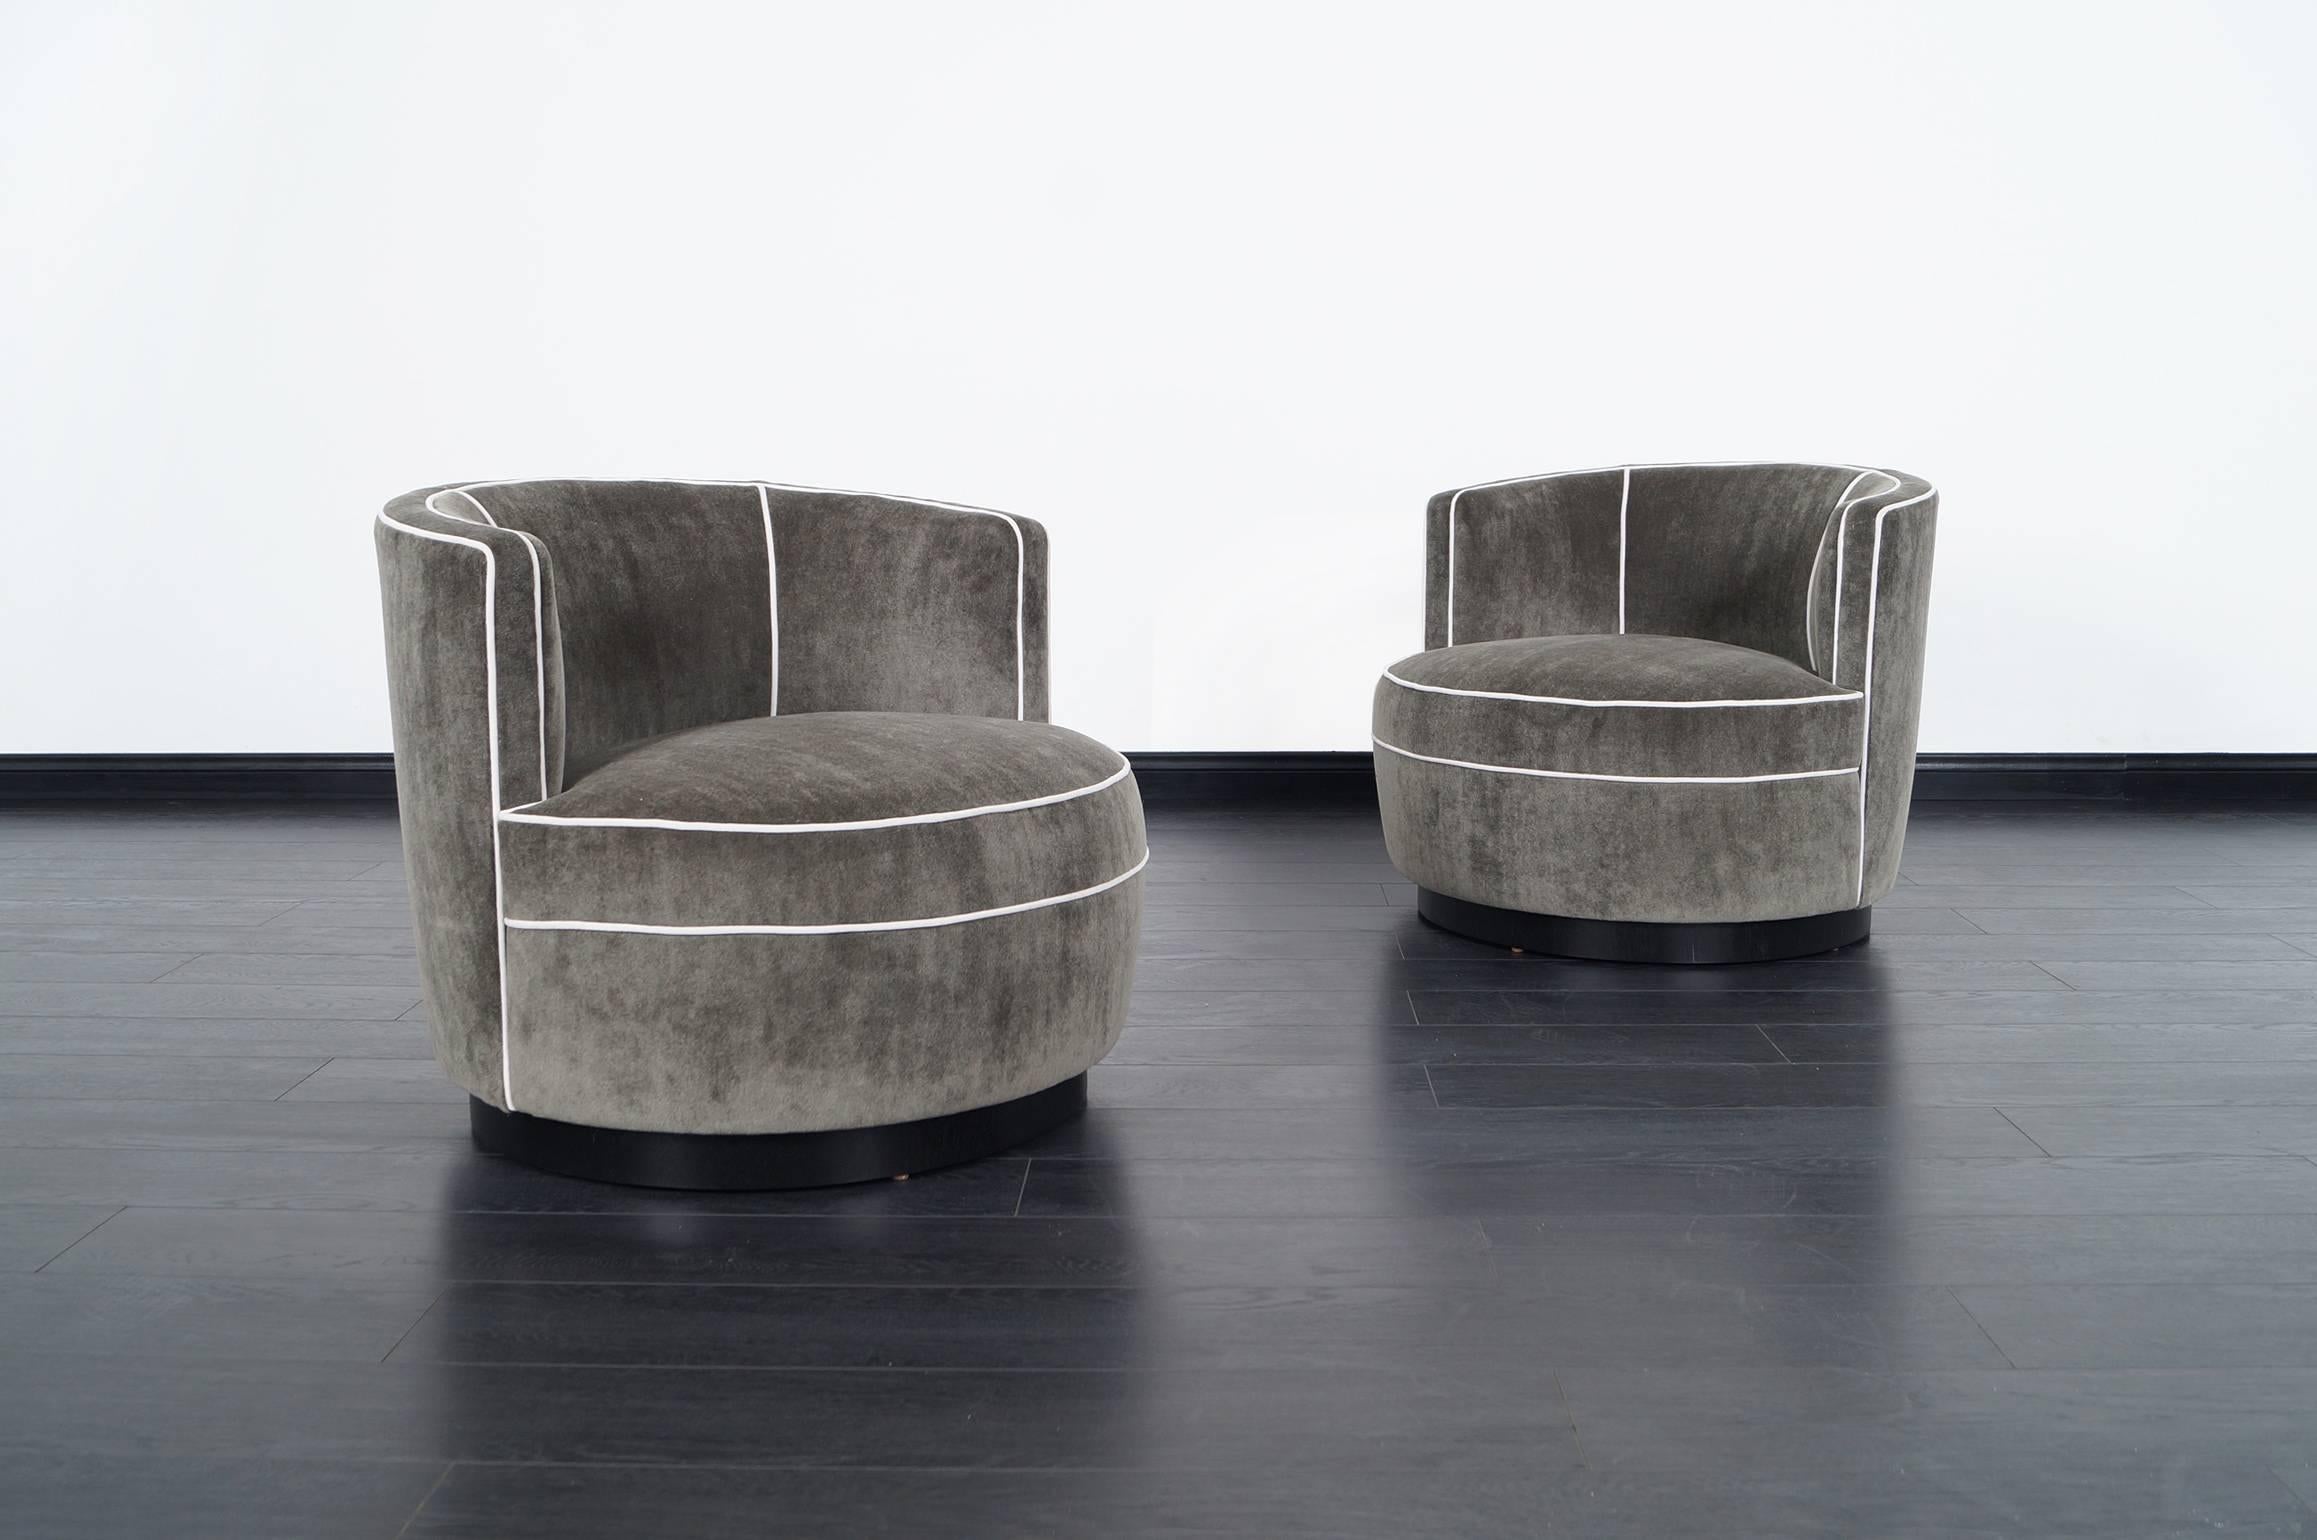 Pair of stunning swivel lounge chairs designed by Edward Wormley for Dunbar. Newly reupholstered in mohair.